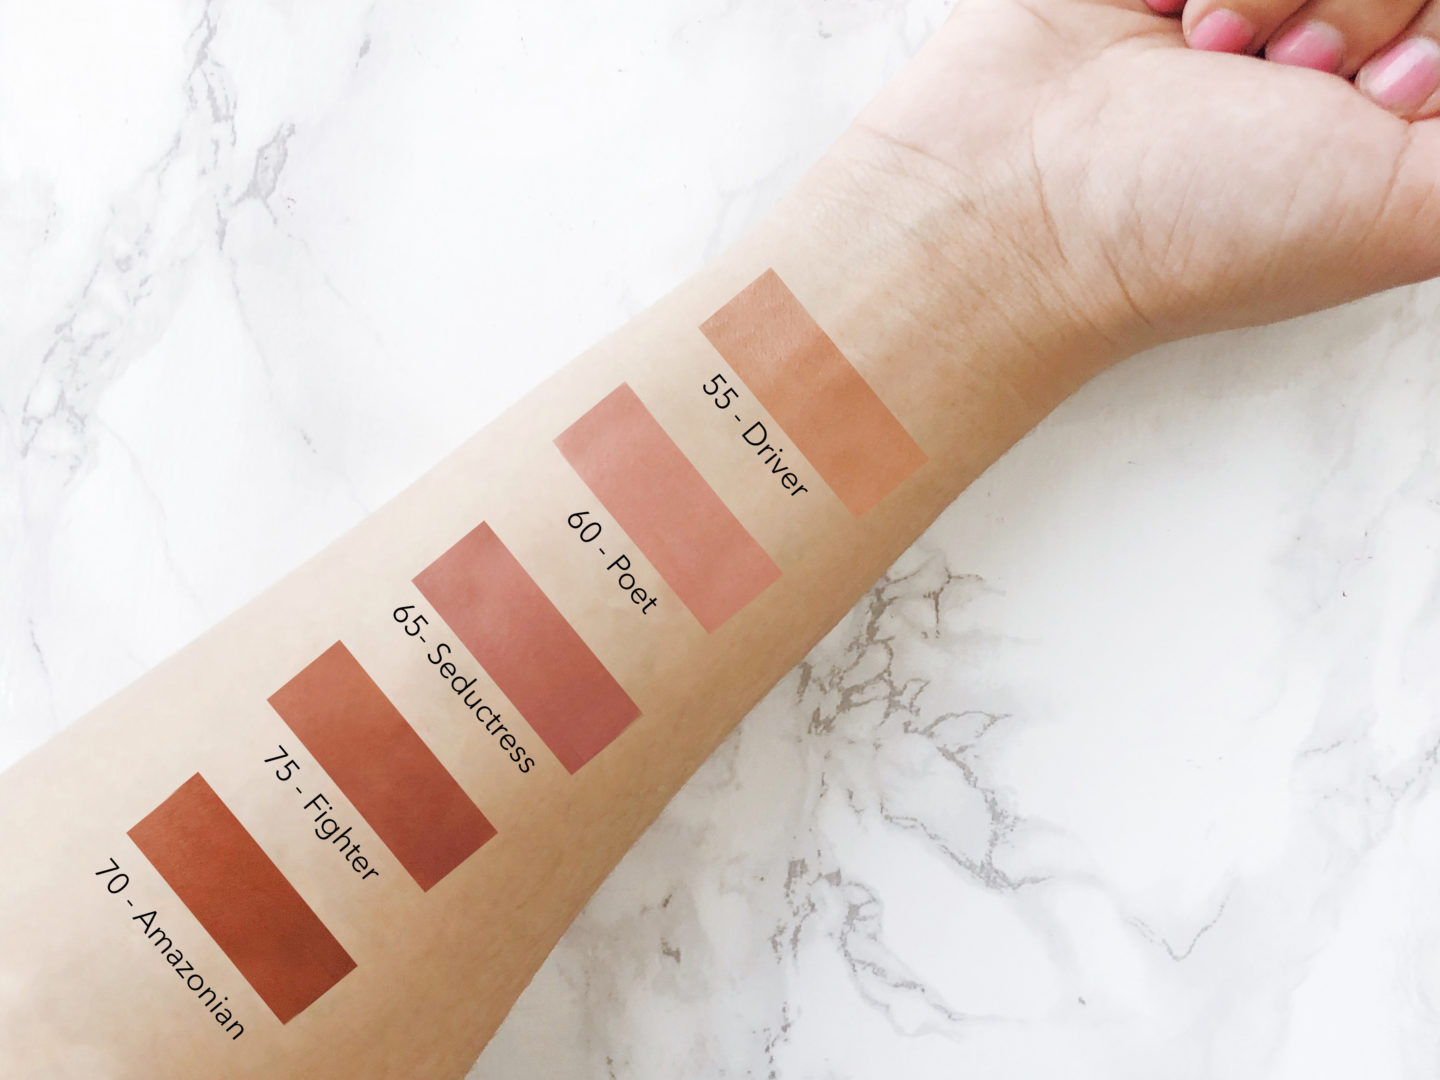 MAYBELLINE SUPER STAY MATTE INK UN-NUDE SWATCHES 